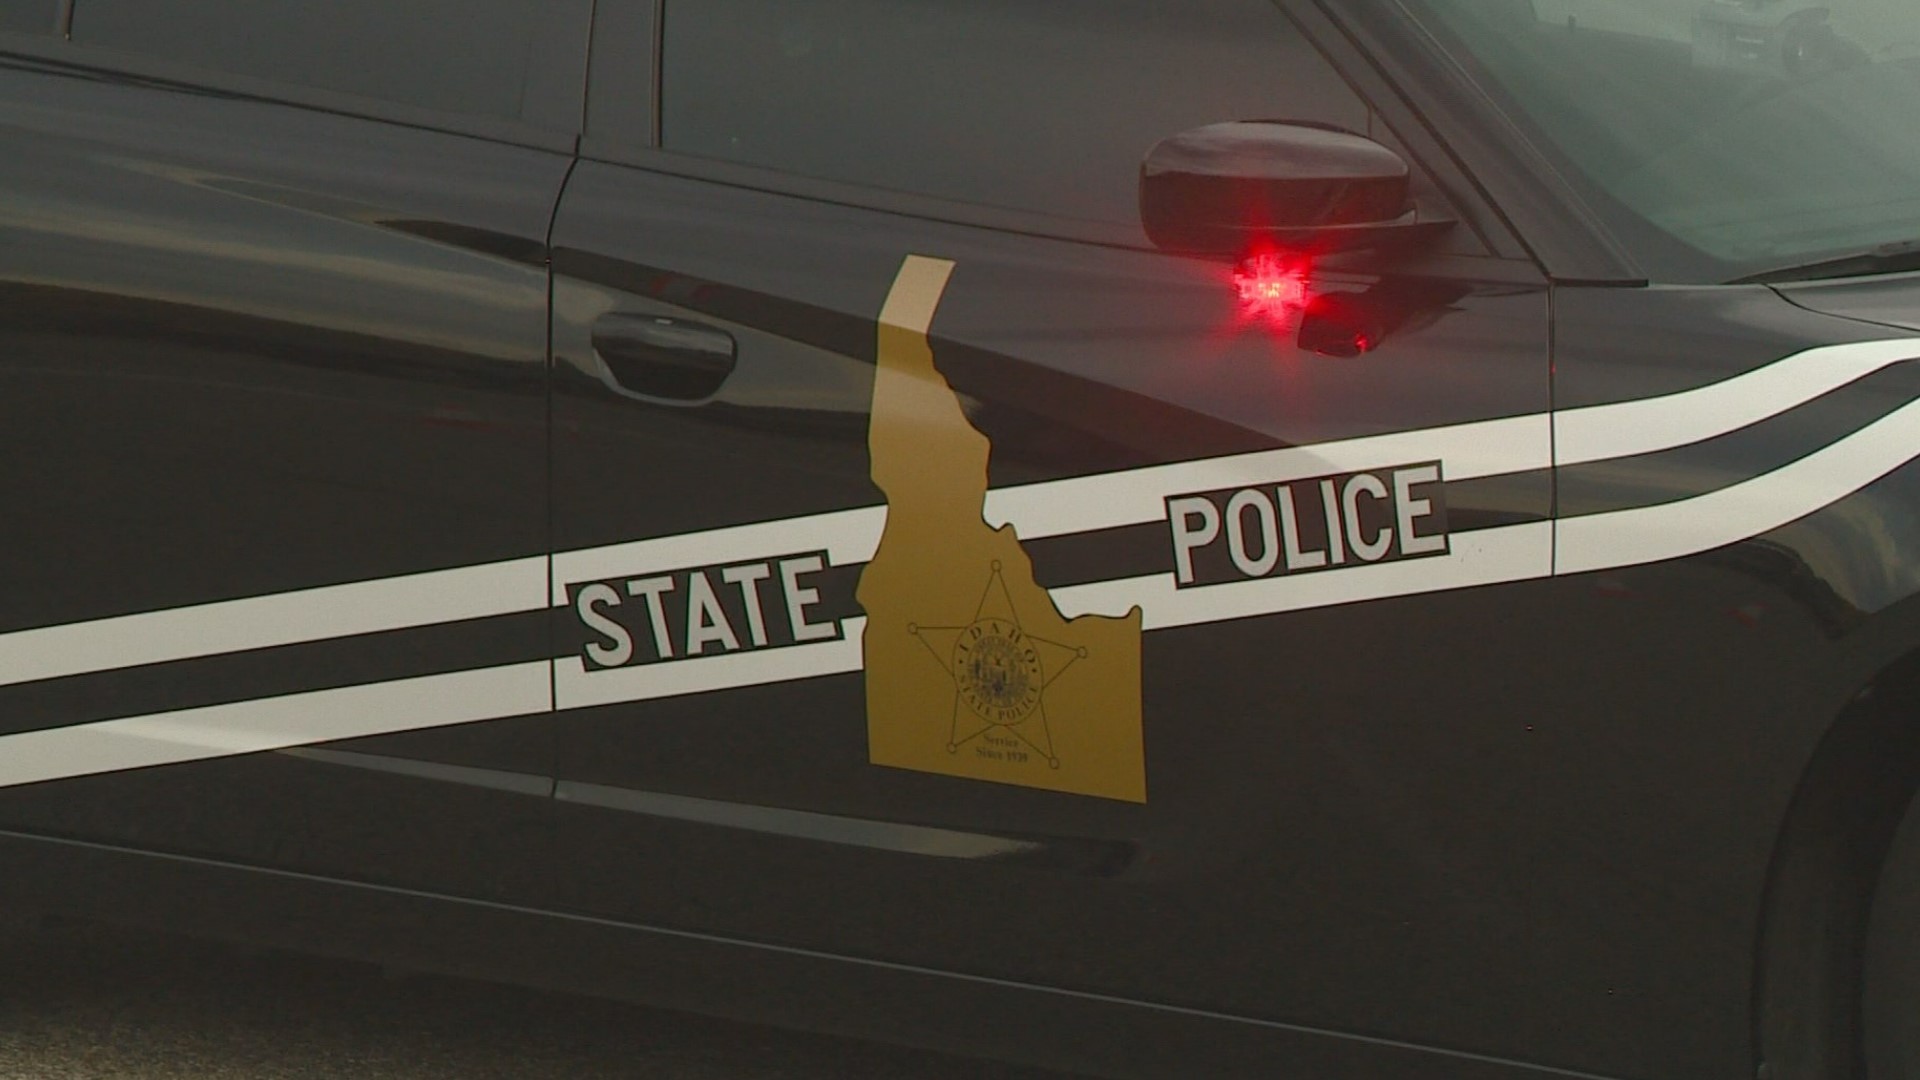 A 57-year-old man and a 94-year-old man from Nyssa were killed in a two-vehicle crash Saturday. Police said a 20-year-old woman from Weiser was hospitalized.